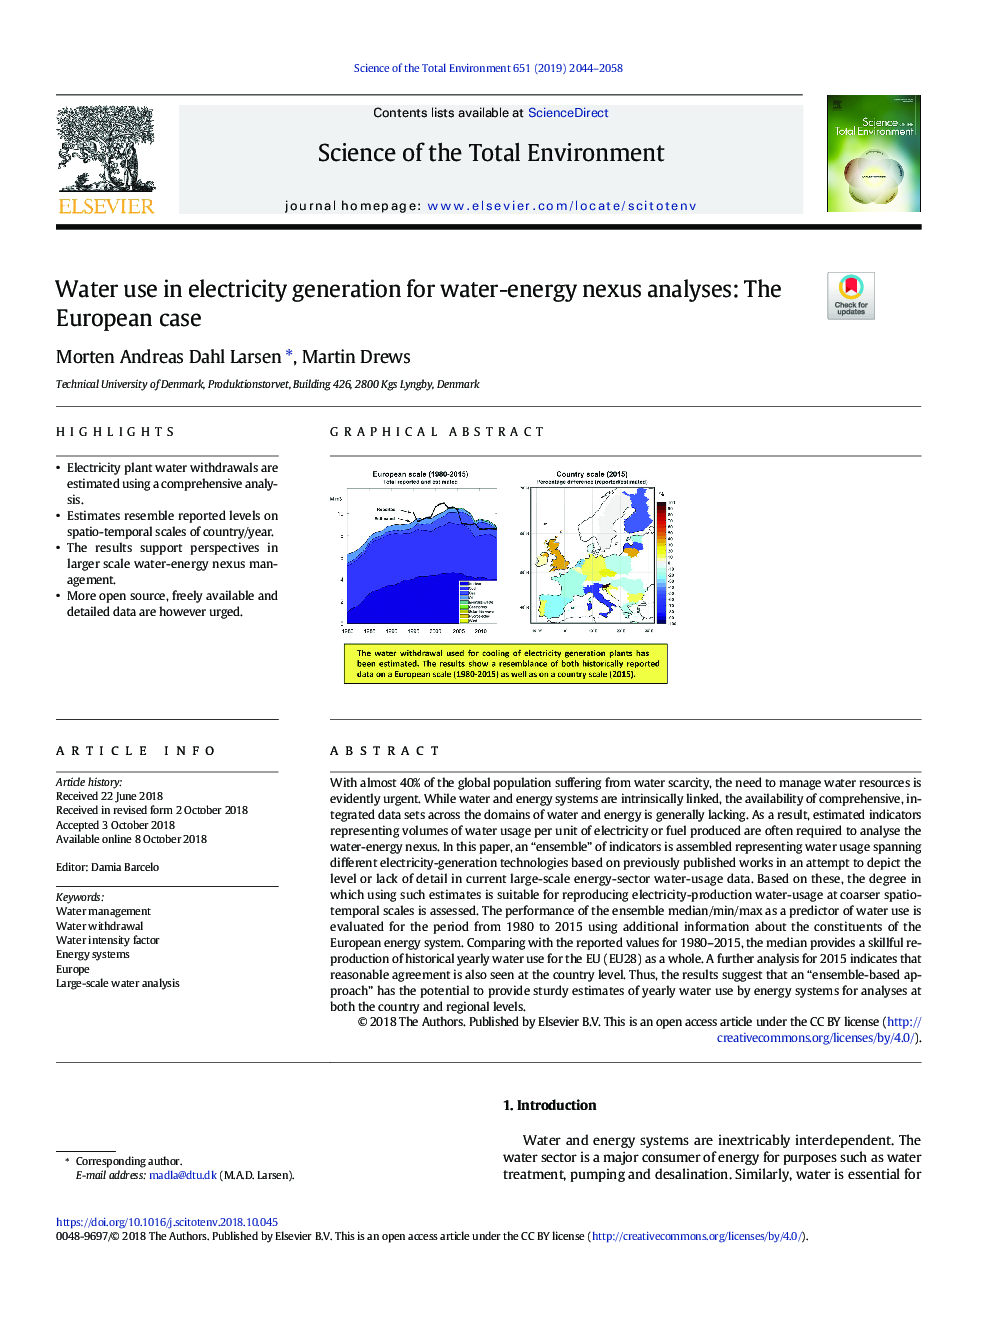 Water use in electricity generation for water-energy nexus analyses: The European case